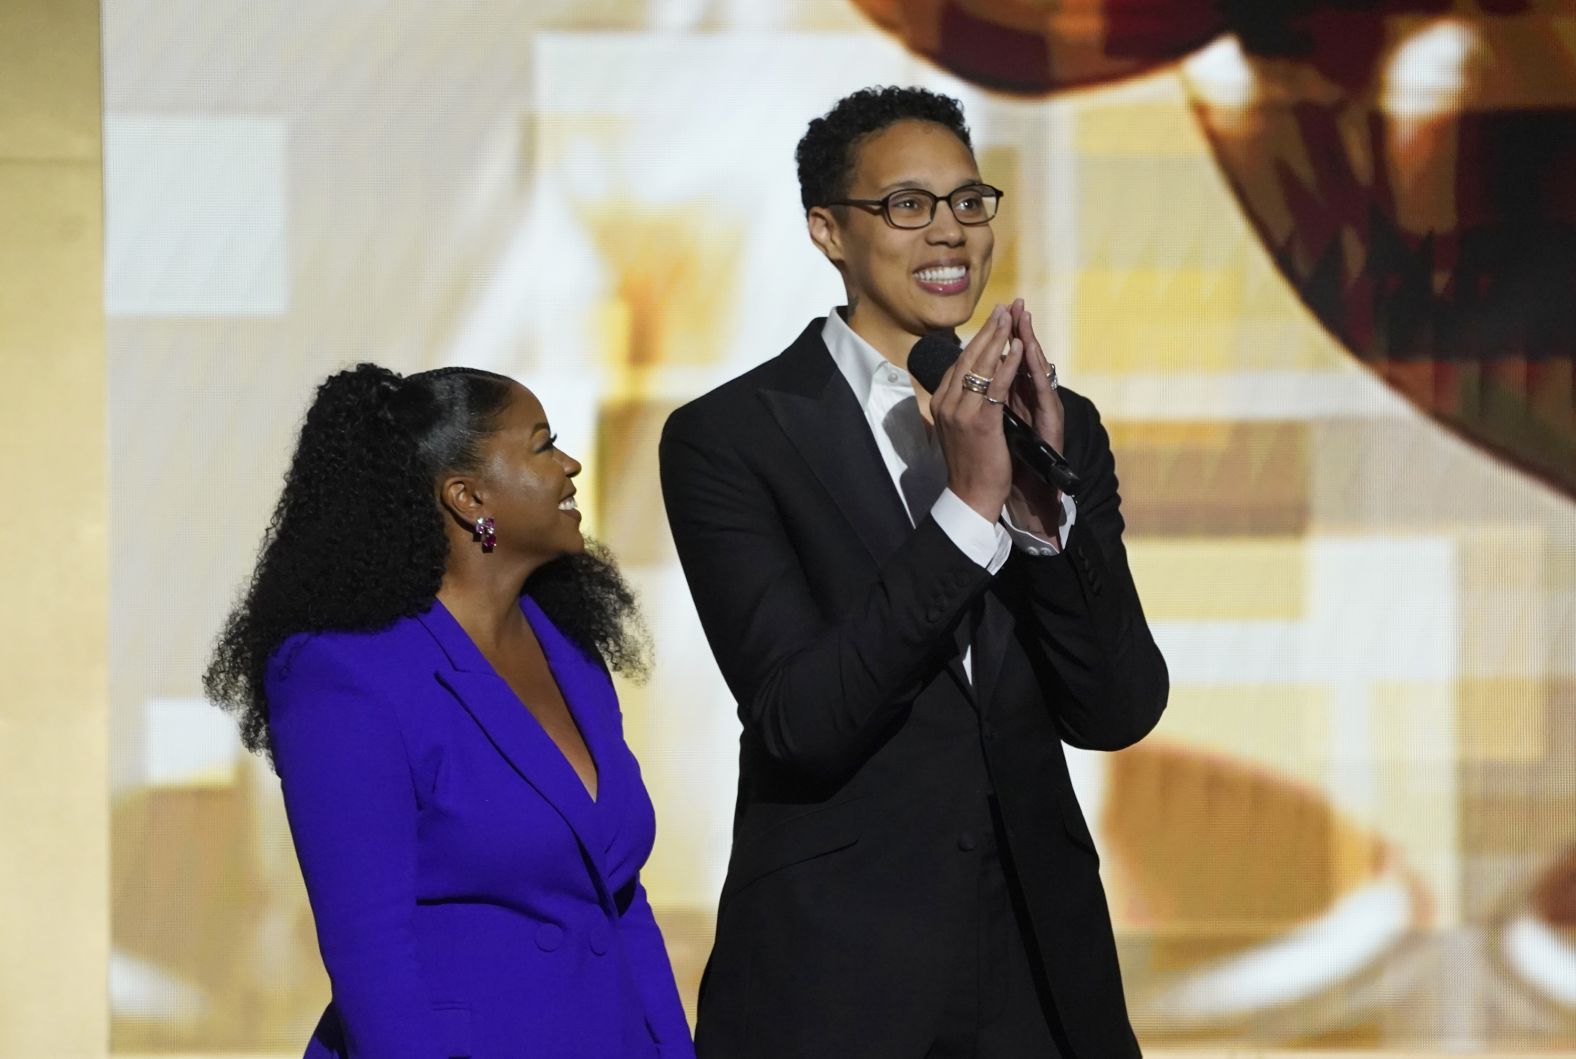 Griner makes a <a href="https://www.cnn.com/videos/us/2023/02/26/brittney-griner-naacp-image-awards-speech-russia-ukraine-prisoners-cp-orig-kj.cnn" target="_blank">surprise appearance</a> at the NAACP Image Awards in February 2023. She received a standing ovation as she took the stage.